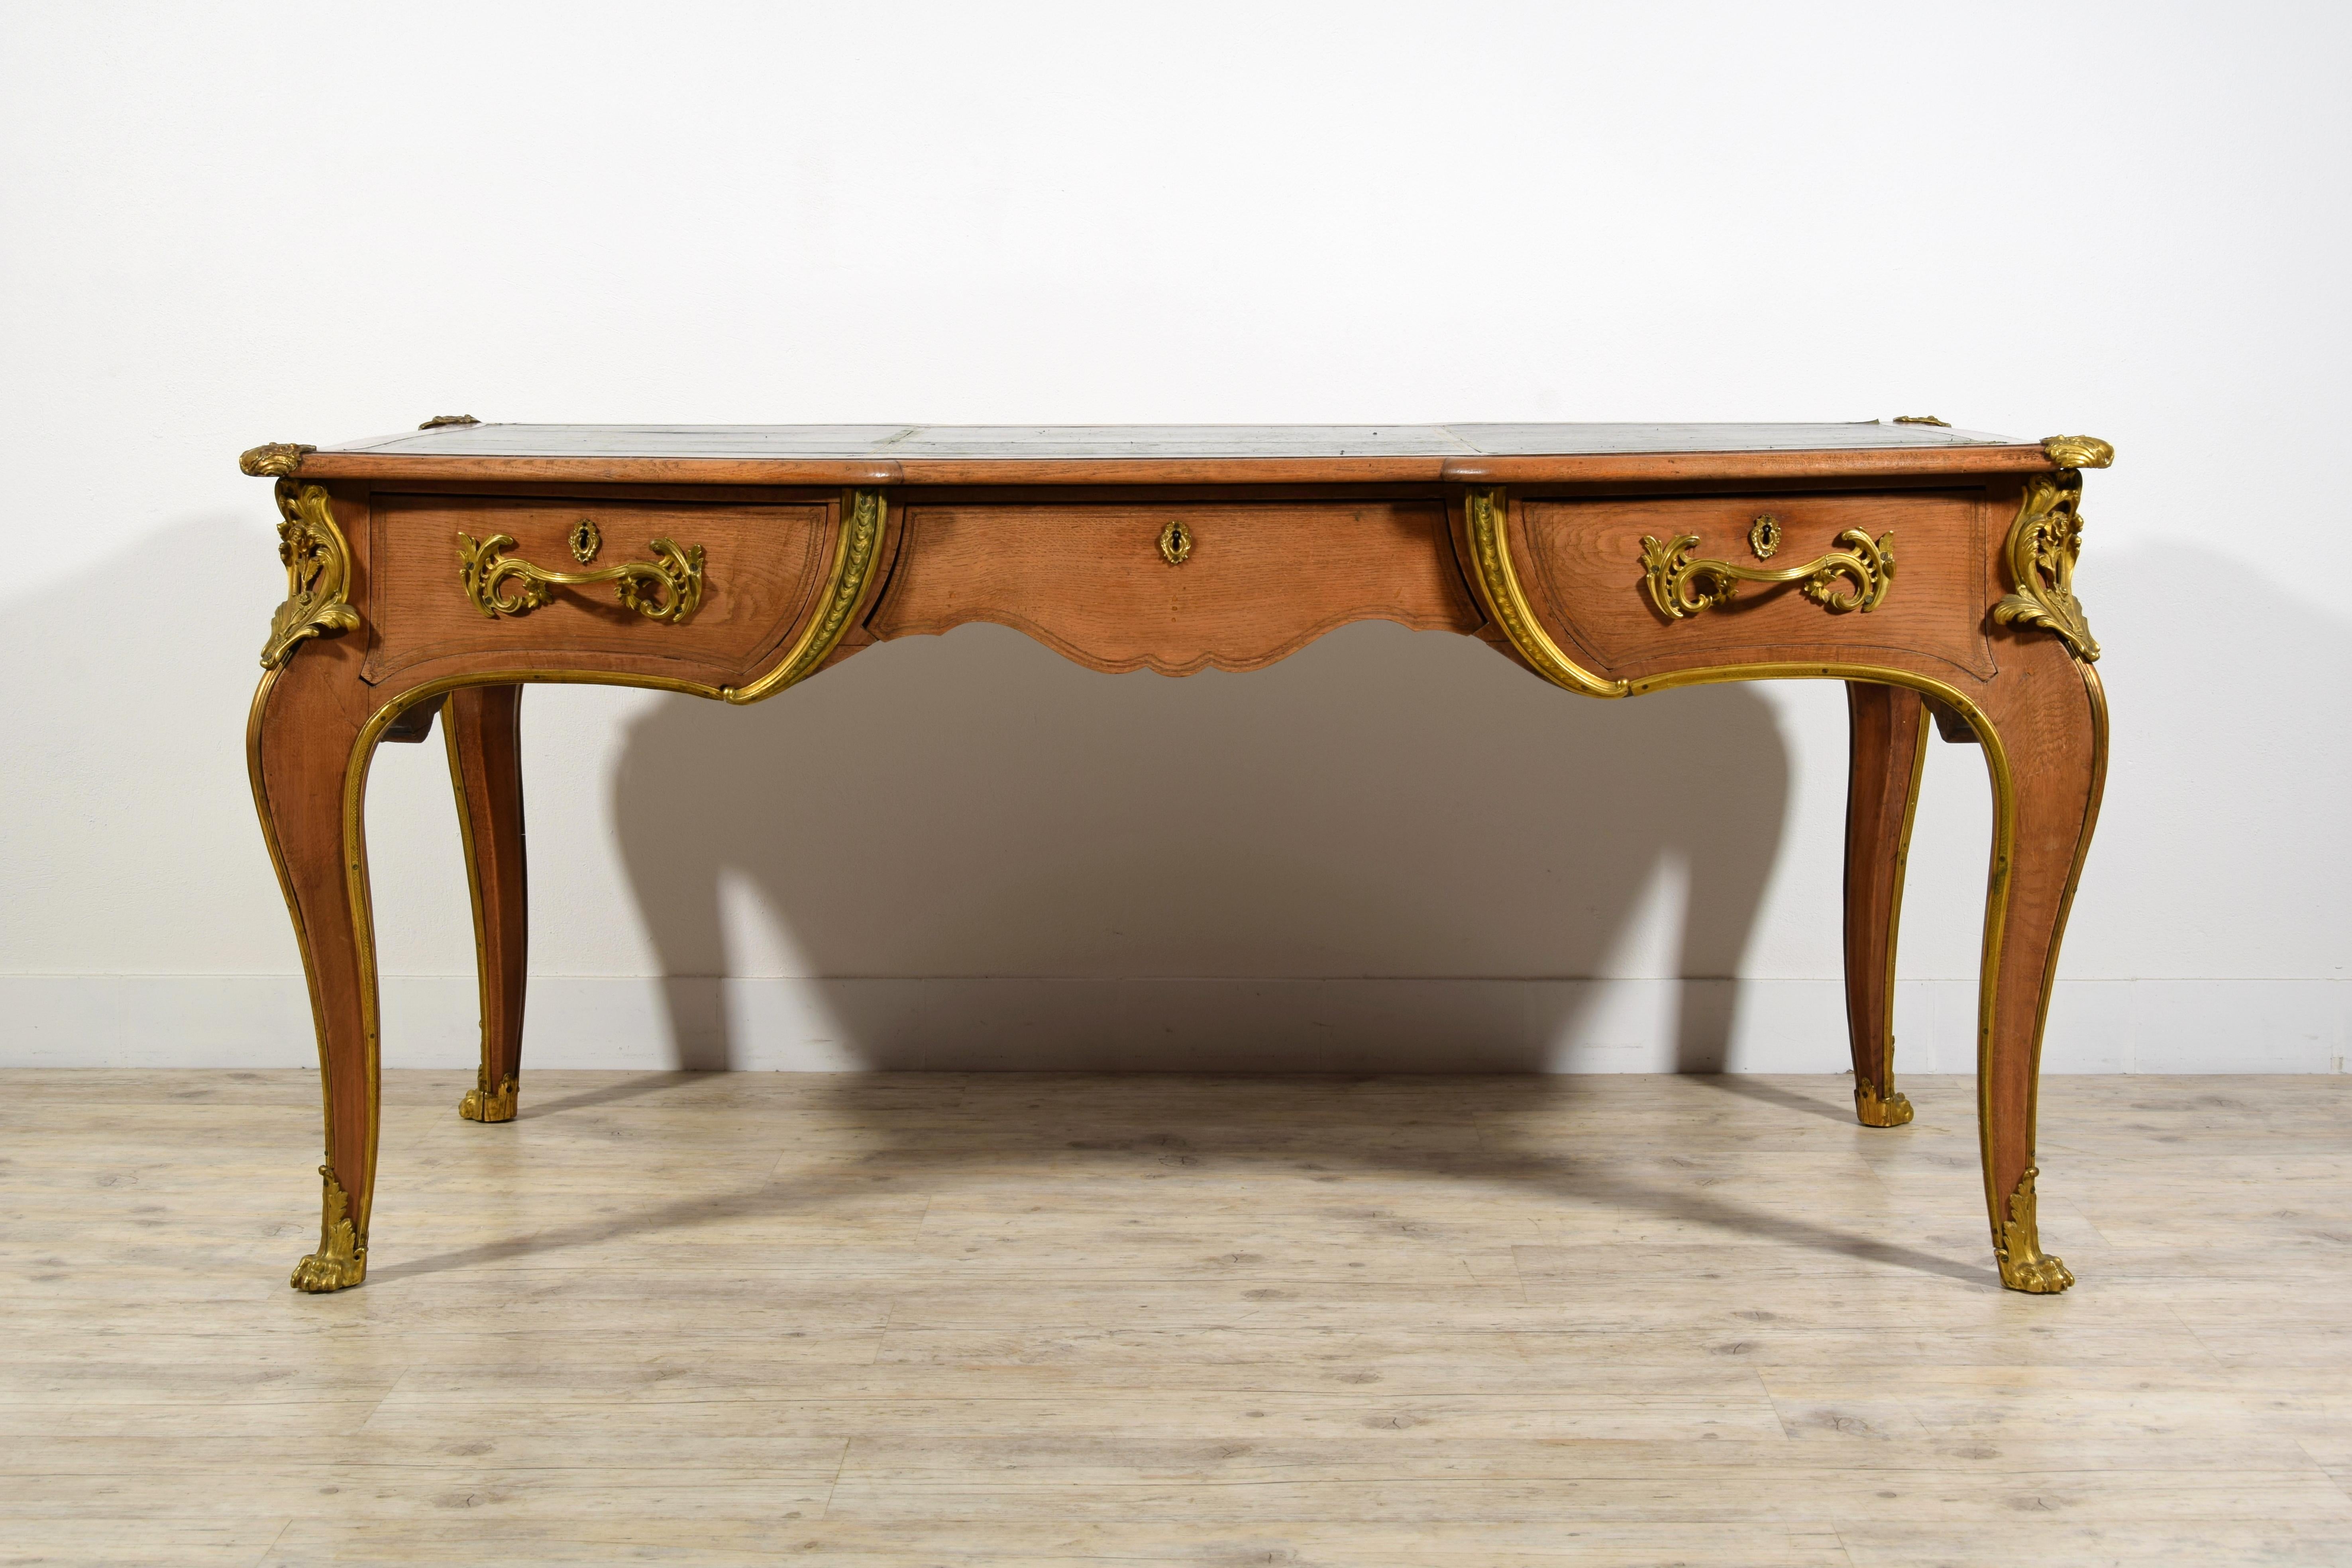 19th Century, French Louis XV style Wood Center with gilded bronze applications desk table

This elegant centre desk, therefore finished on all four sides, was made in the first half of the nineteenth century in France, in Louis XV style. The